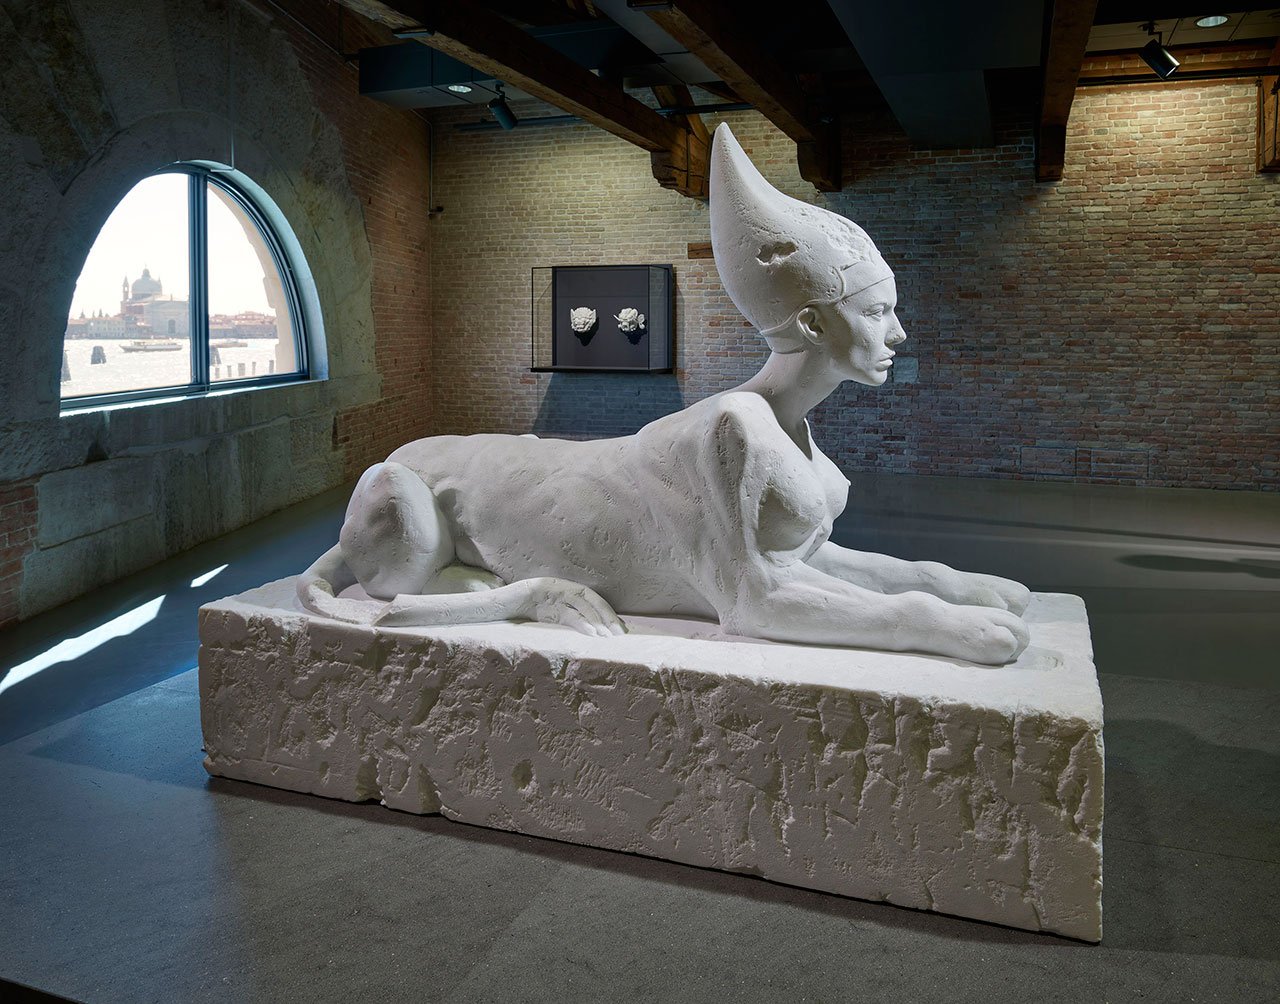 From Punta della Dogana, Room 4: (left to right) Damien Hirst, Pair of Masks (left), Sphinx (right). Photographed by Prudence Cuming Associates © Damien Hirst and Science Ltd. All rights reserved, DACS/SIAE 2017.